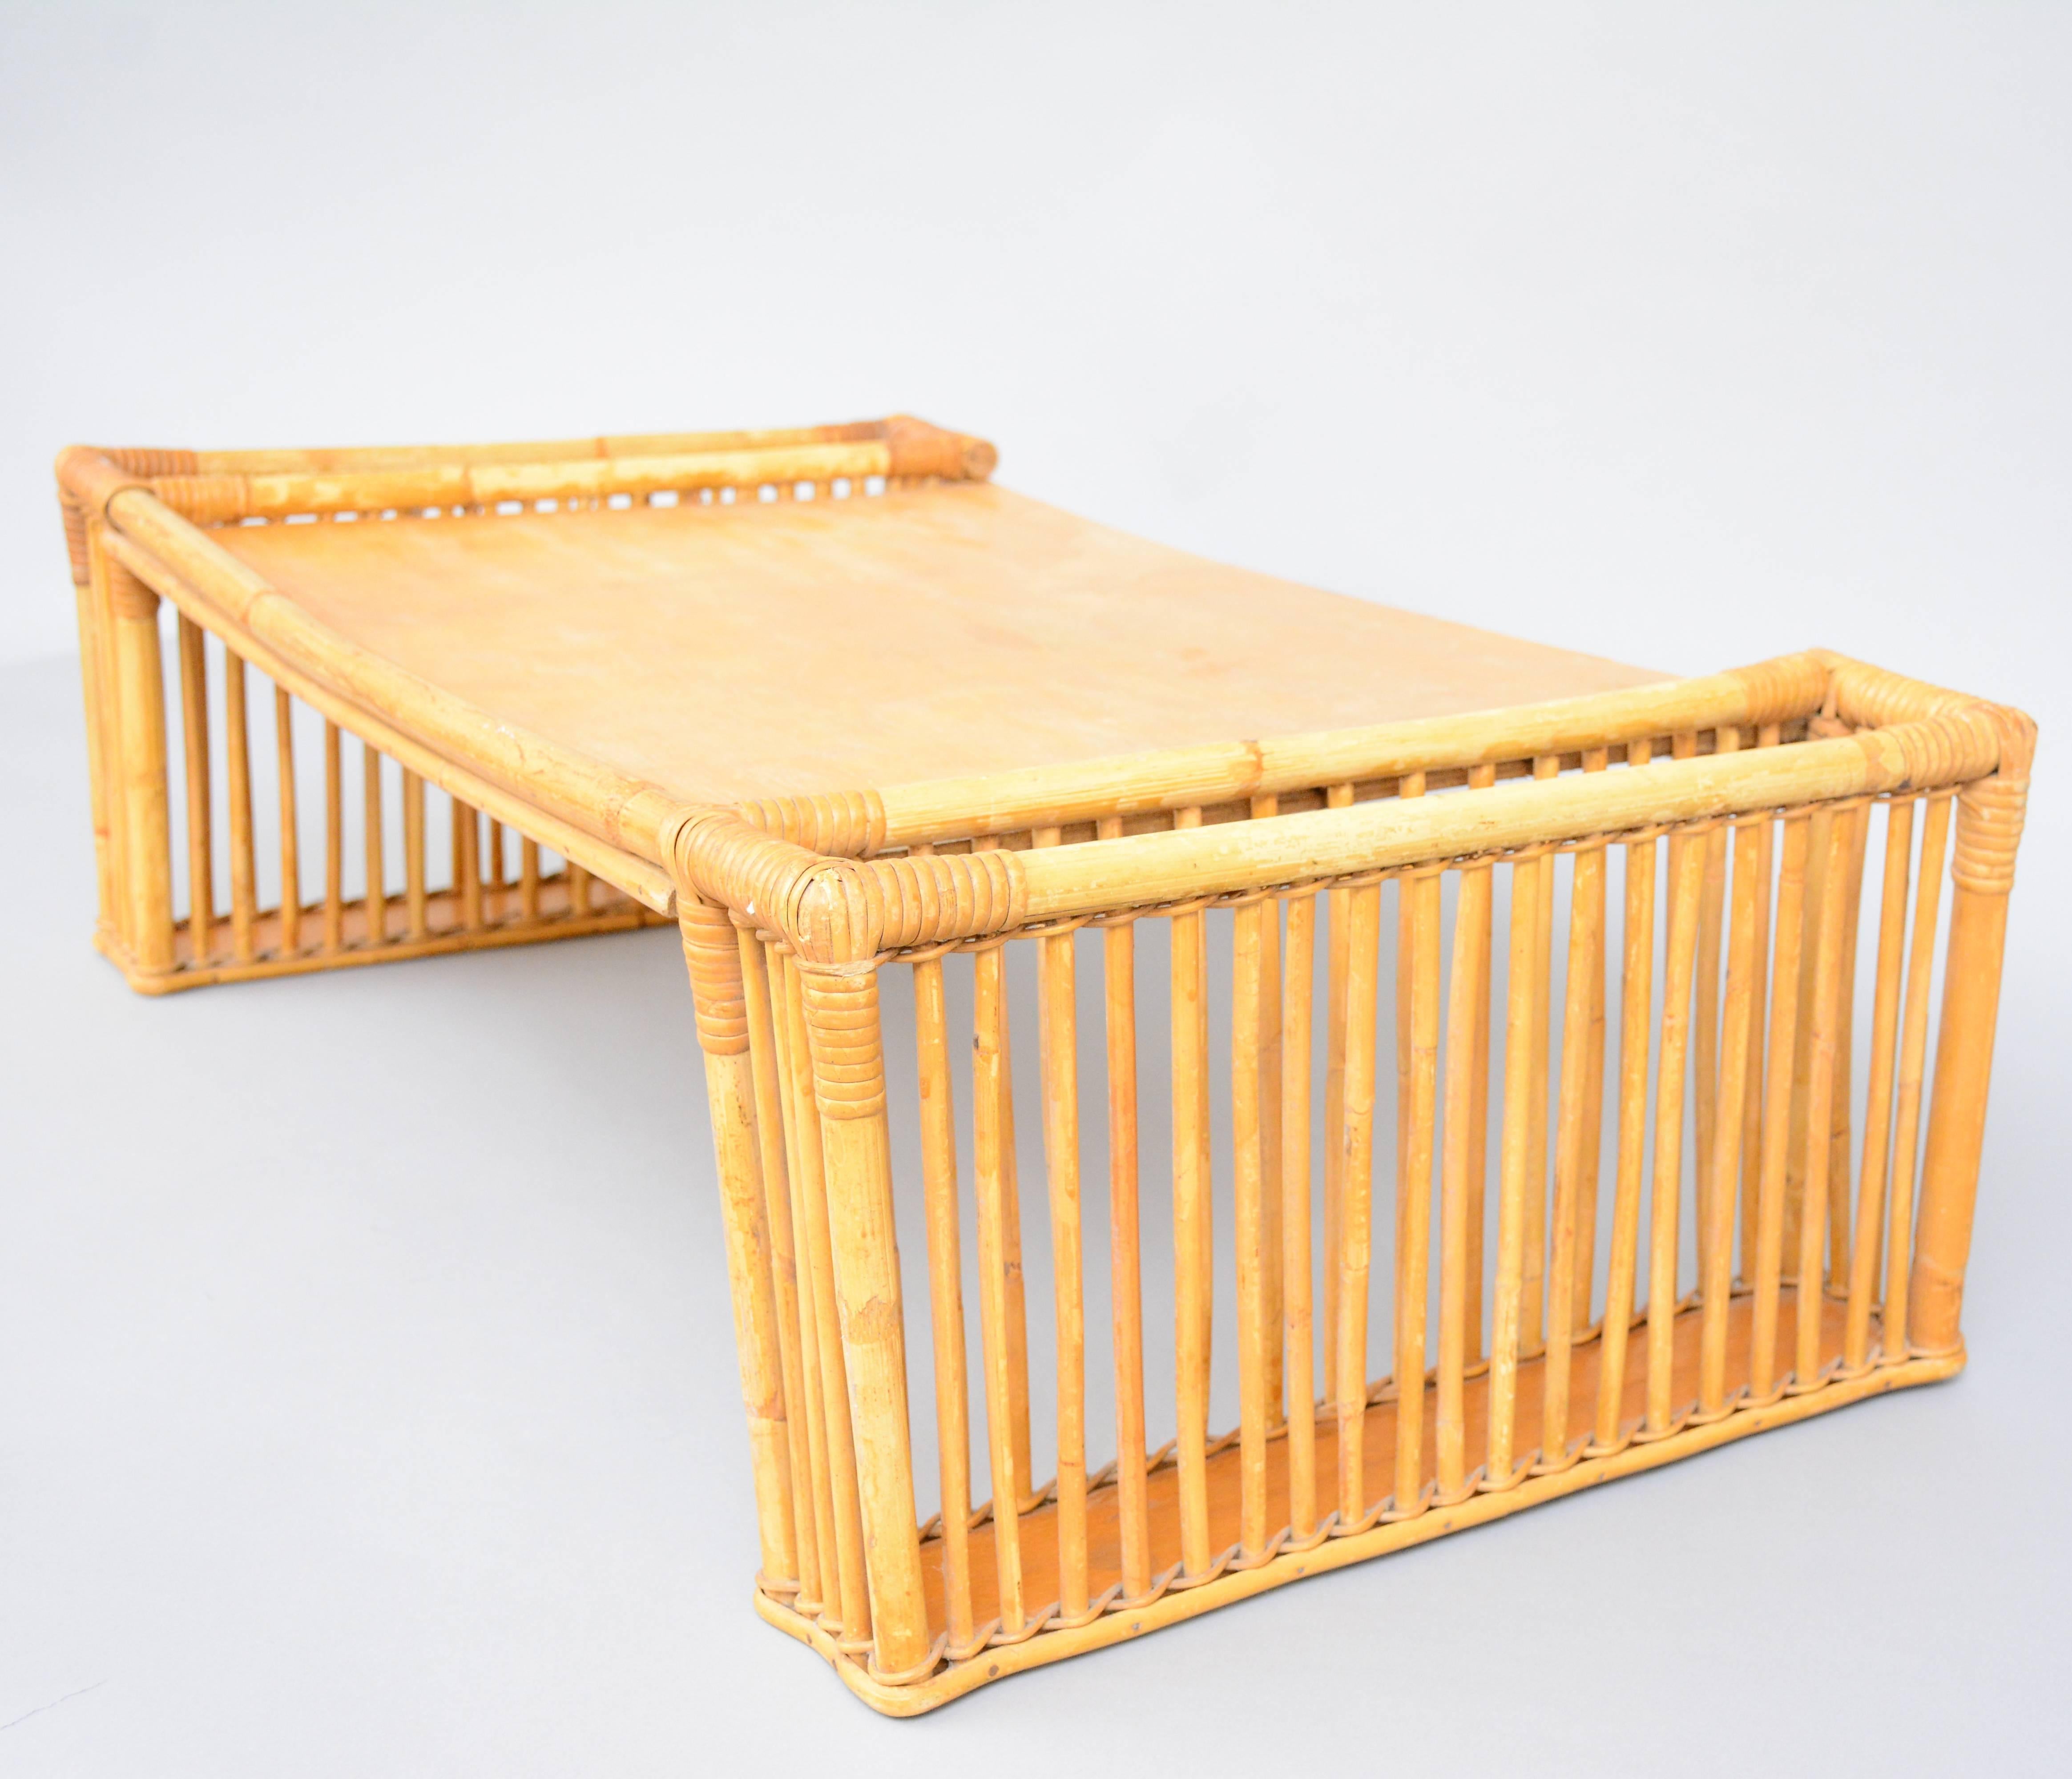 A rattan bed tray by Robert Wengler, Copenhagen, Denmark. Labeled with metal makers mark, 1930s-1940s.